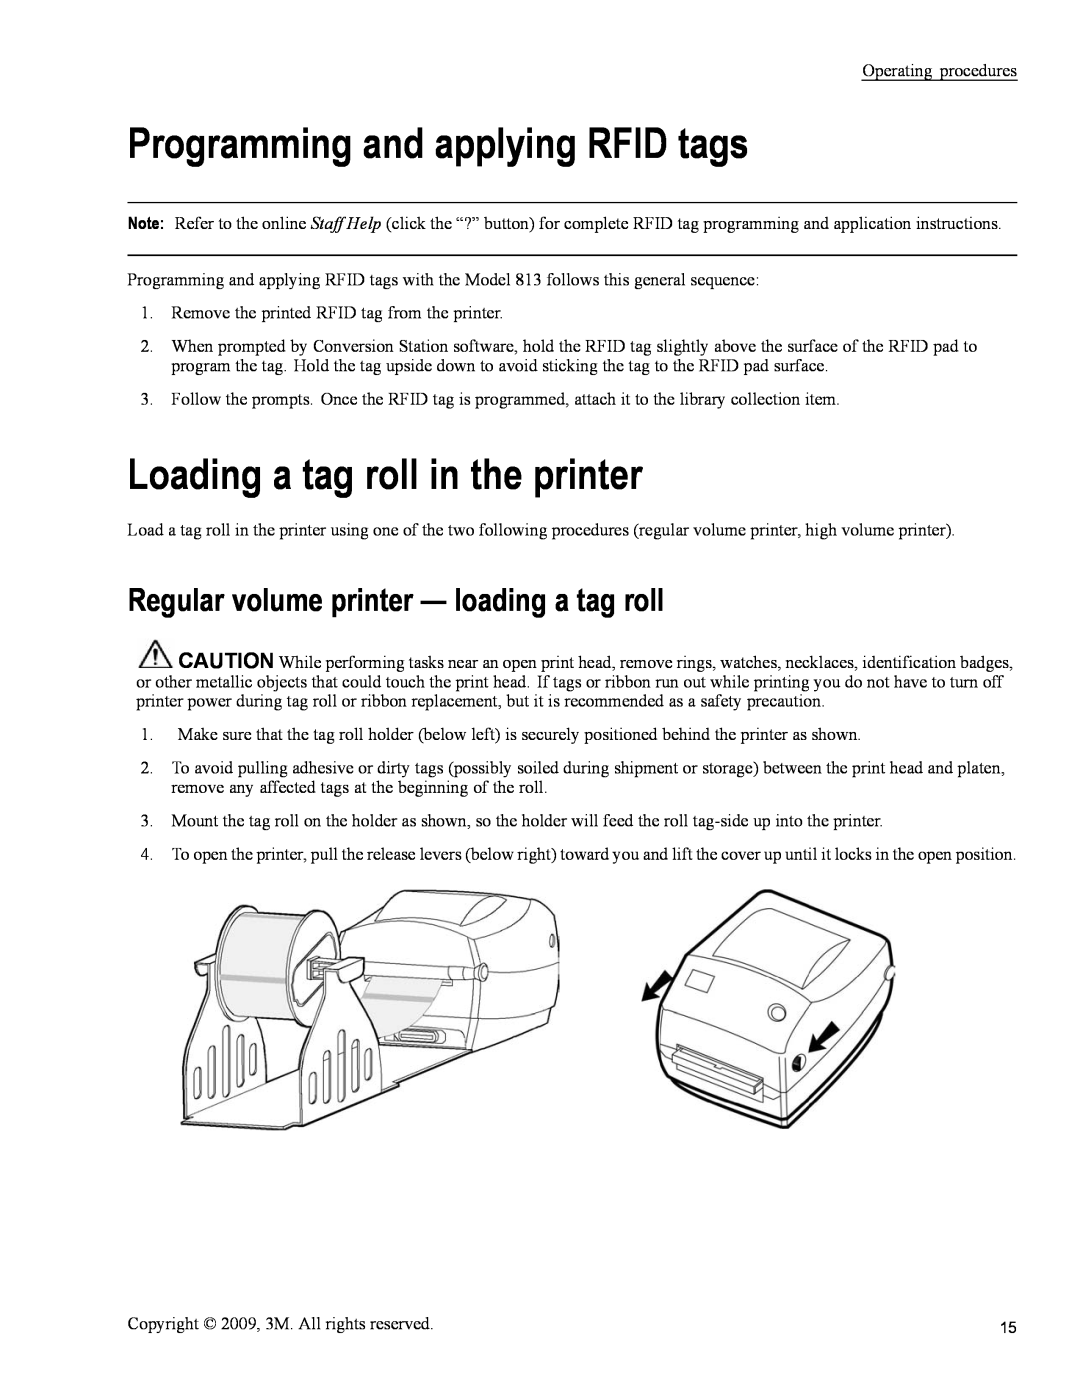 3M 813 Programming and applying RFID tags, Loading a tag roll in the printer, Regular volume printer - loading a tag roll 